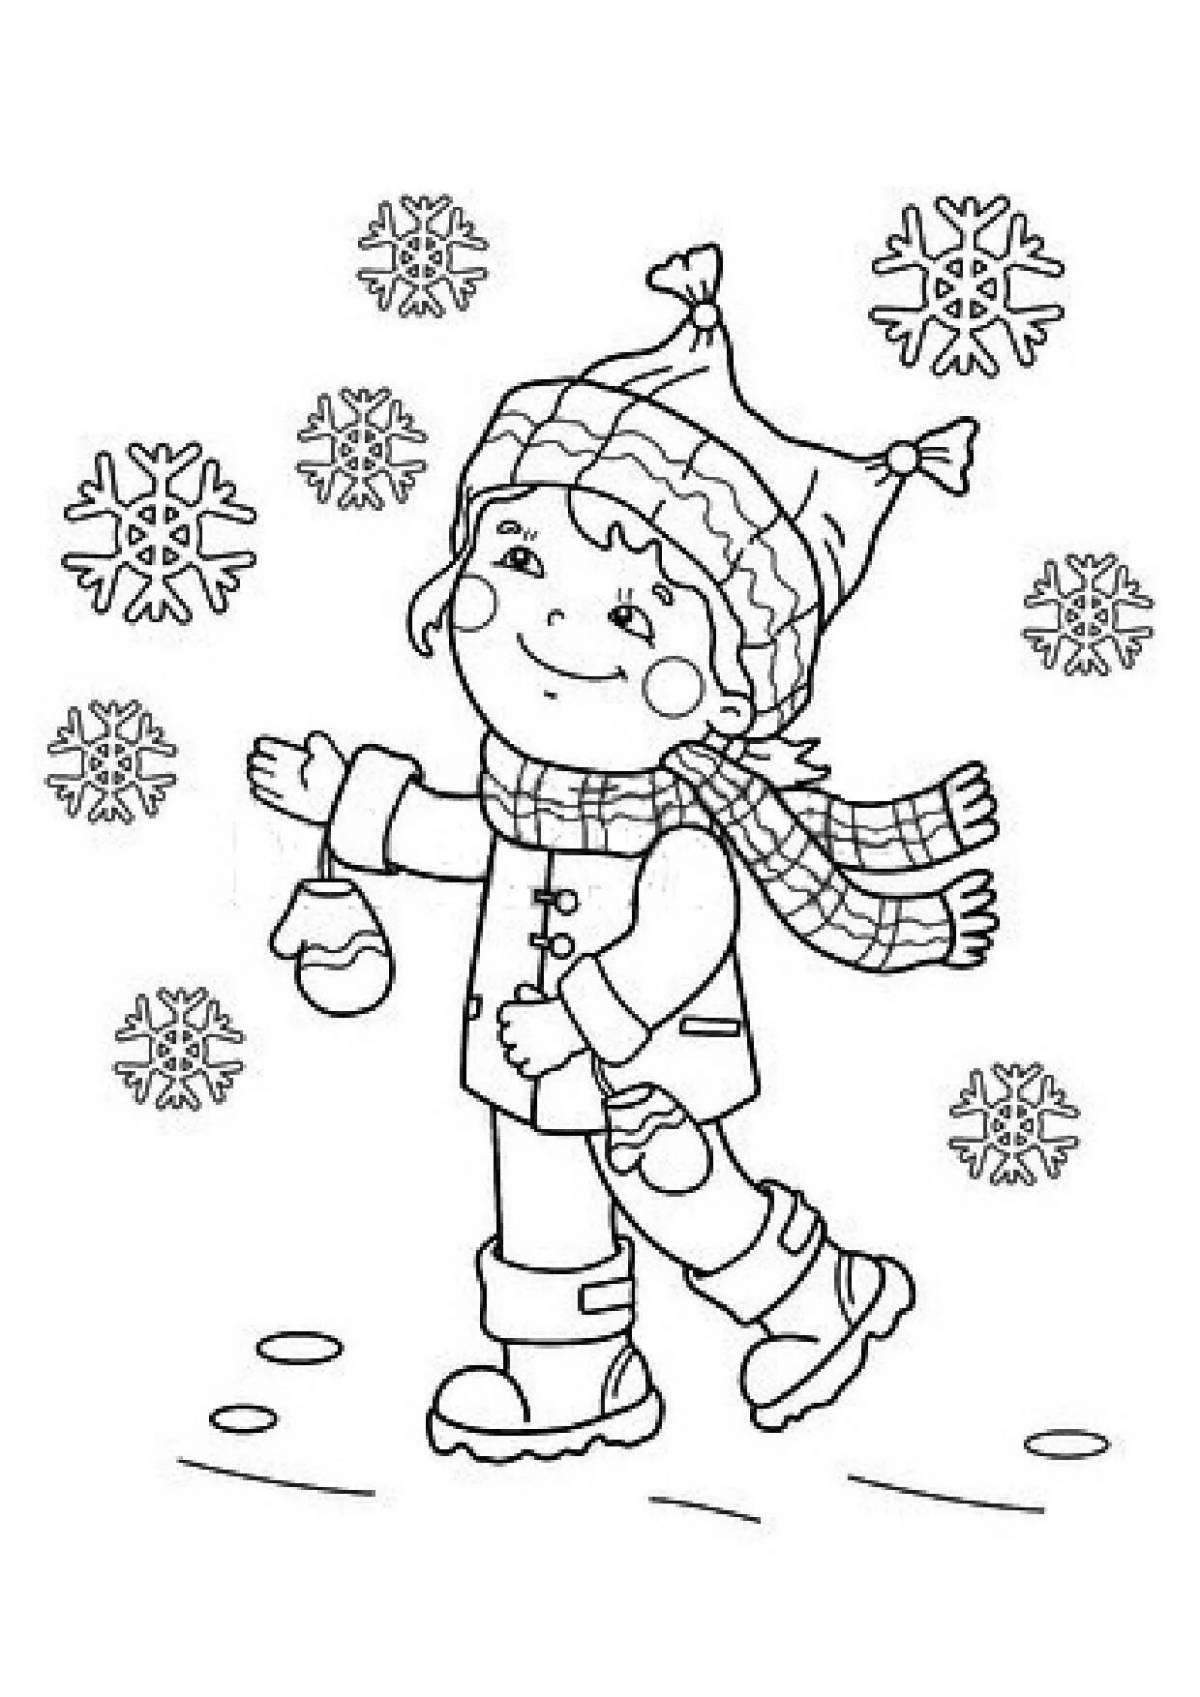 Color-frenzy snowball coloring page for kids